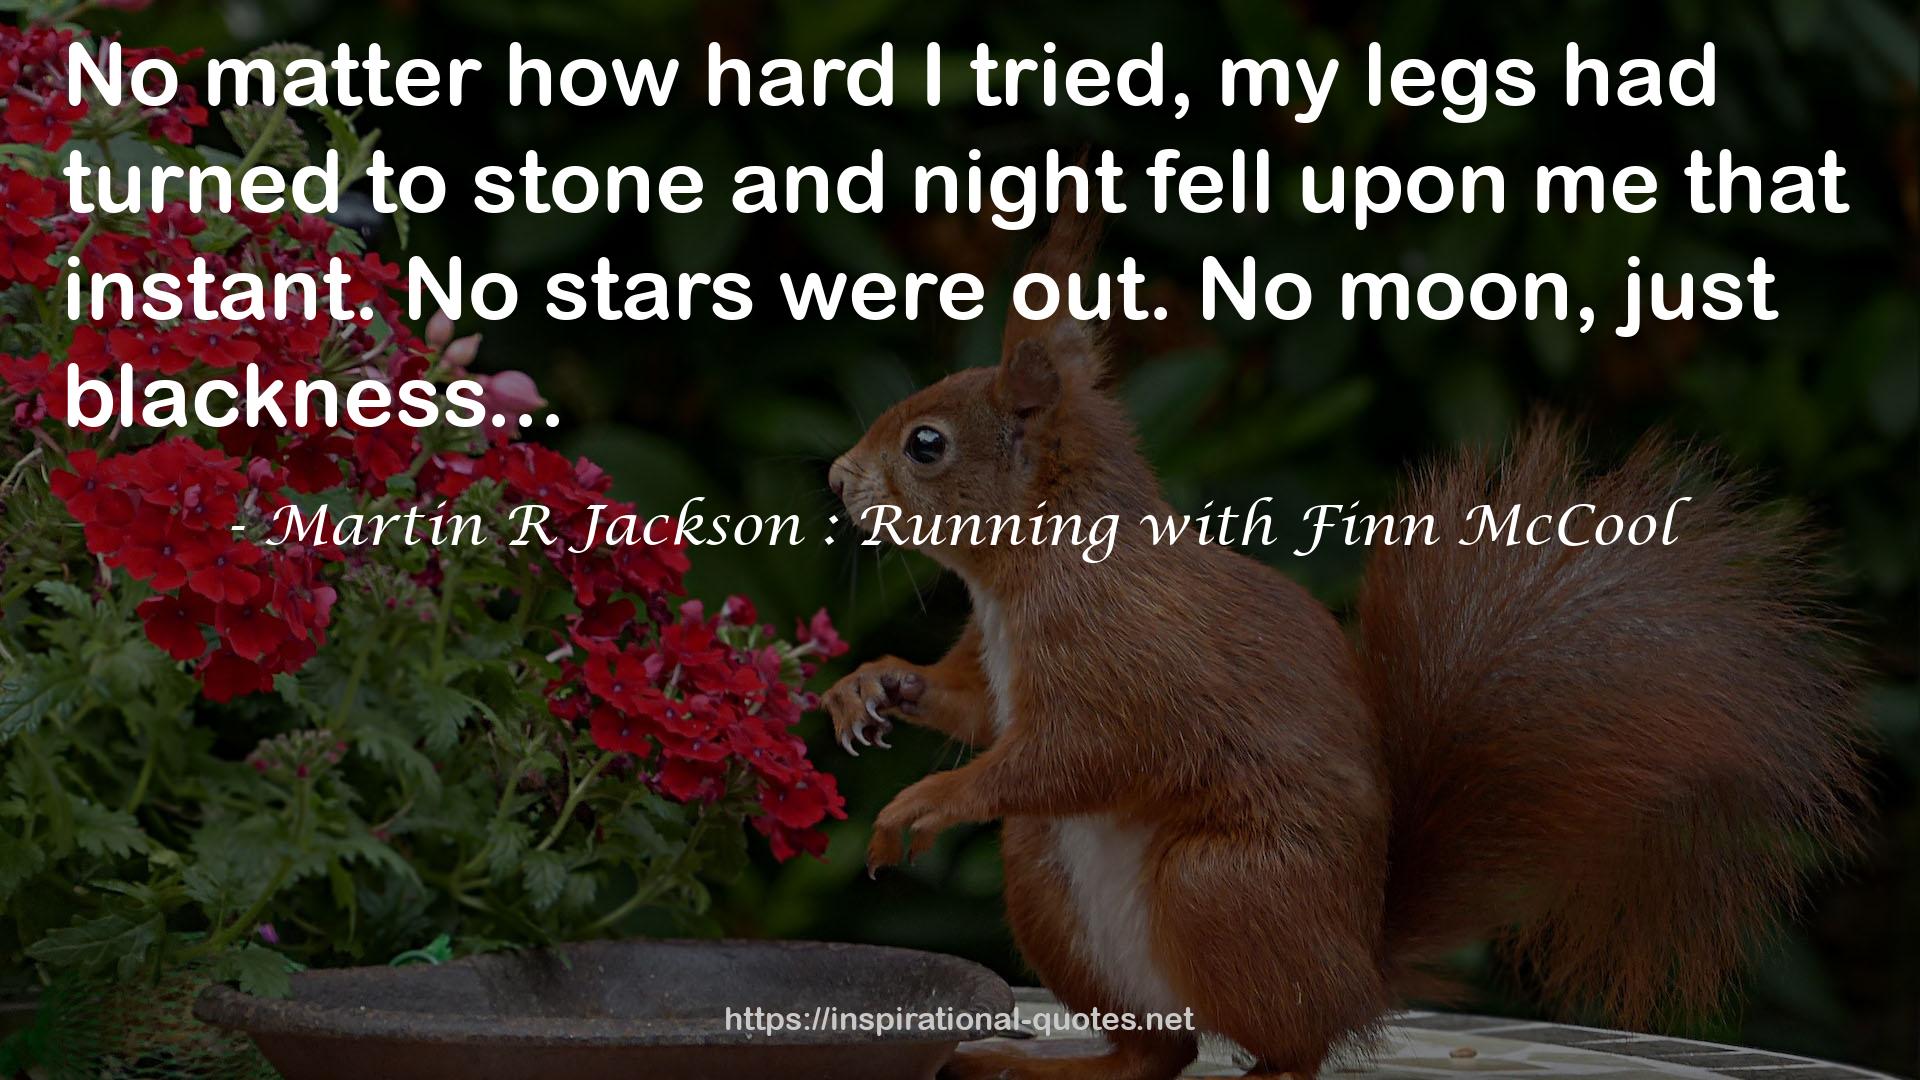 Martin R Jackson : Running with Finn McCool QUOTES